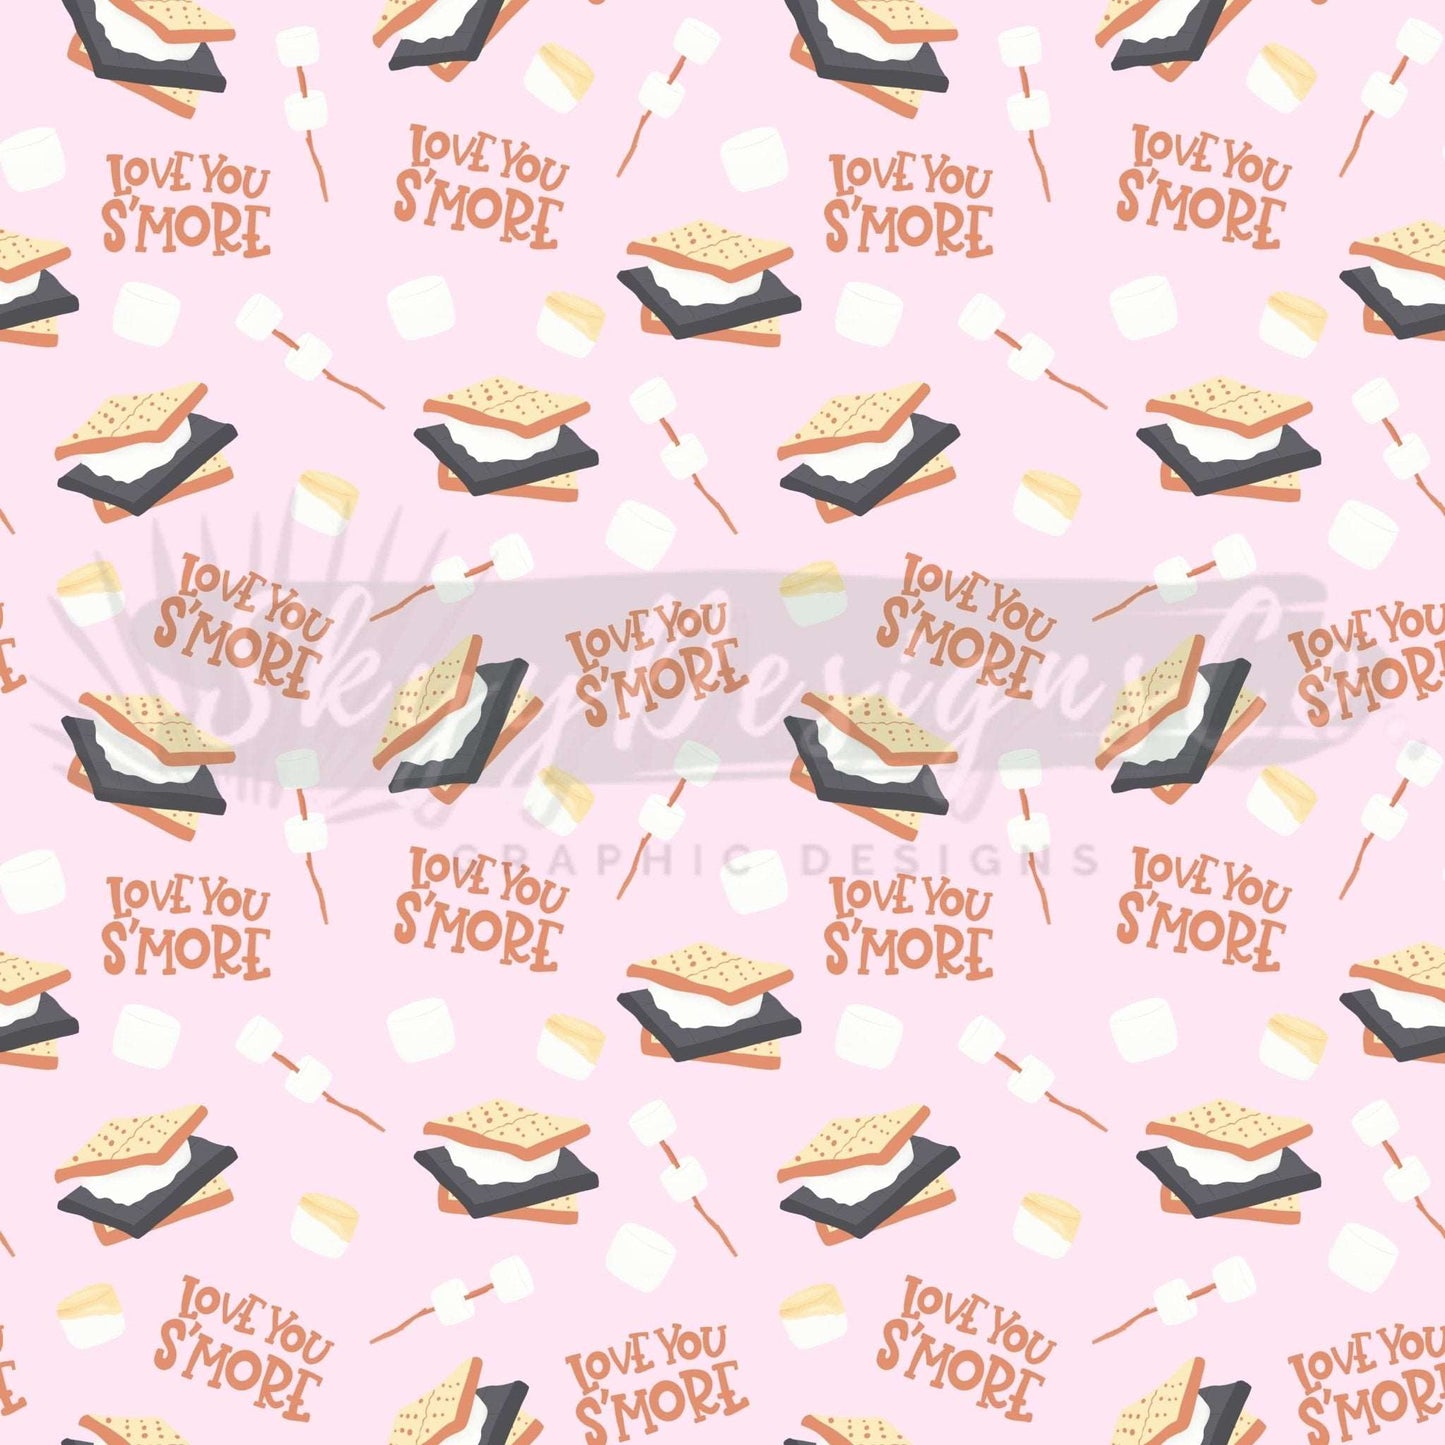 Love you smores digital seamless pattern for fabrics and wallpapers, Smores seamless repeat pattern, Camping seamless digital paper - SkyyDesignsCo